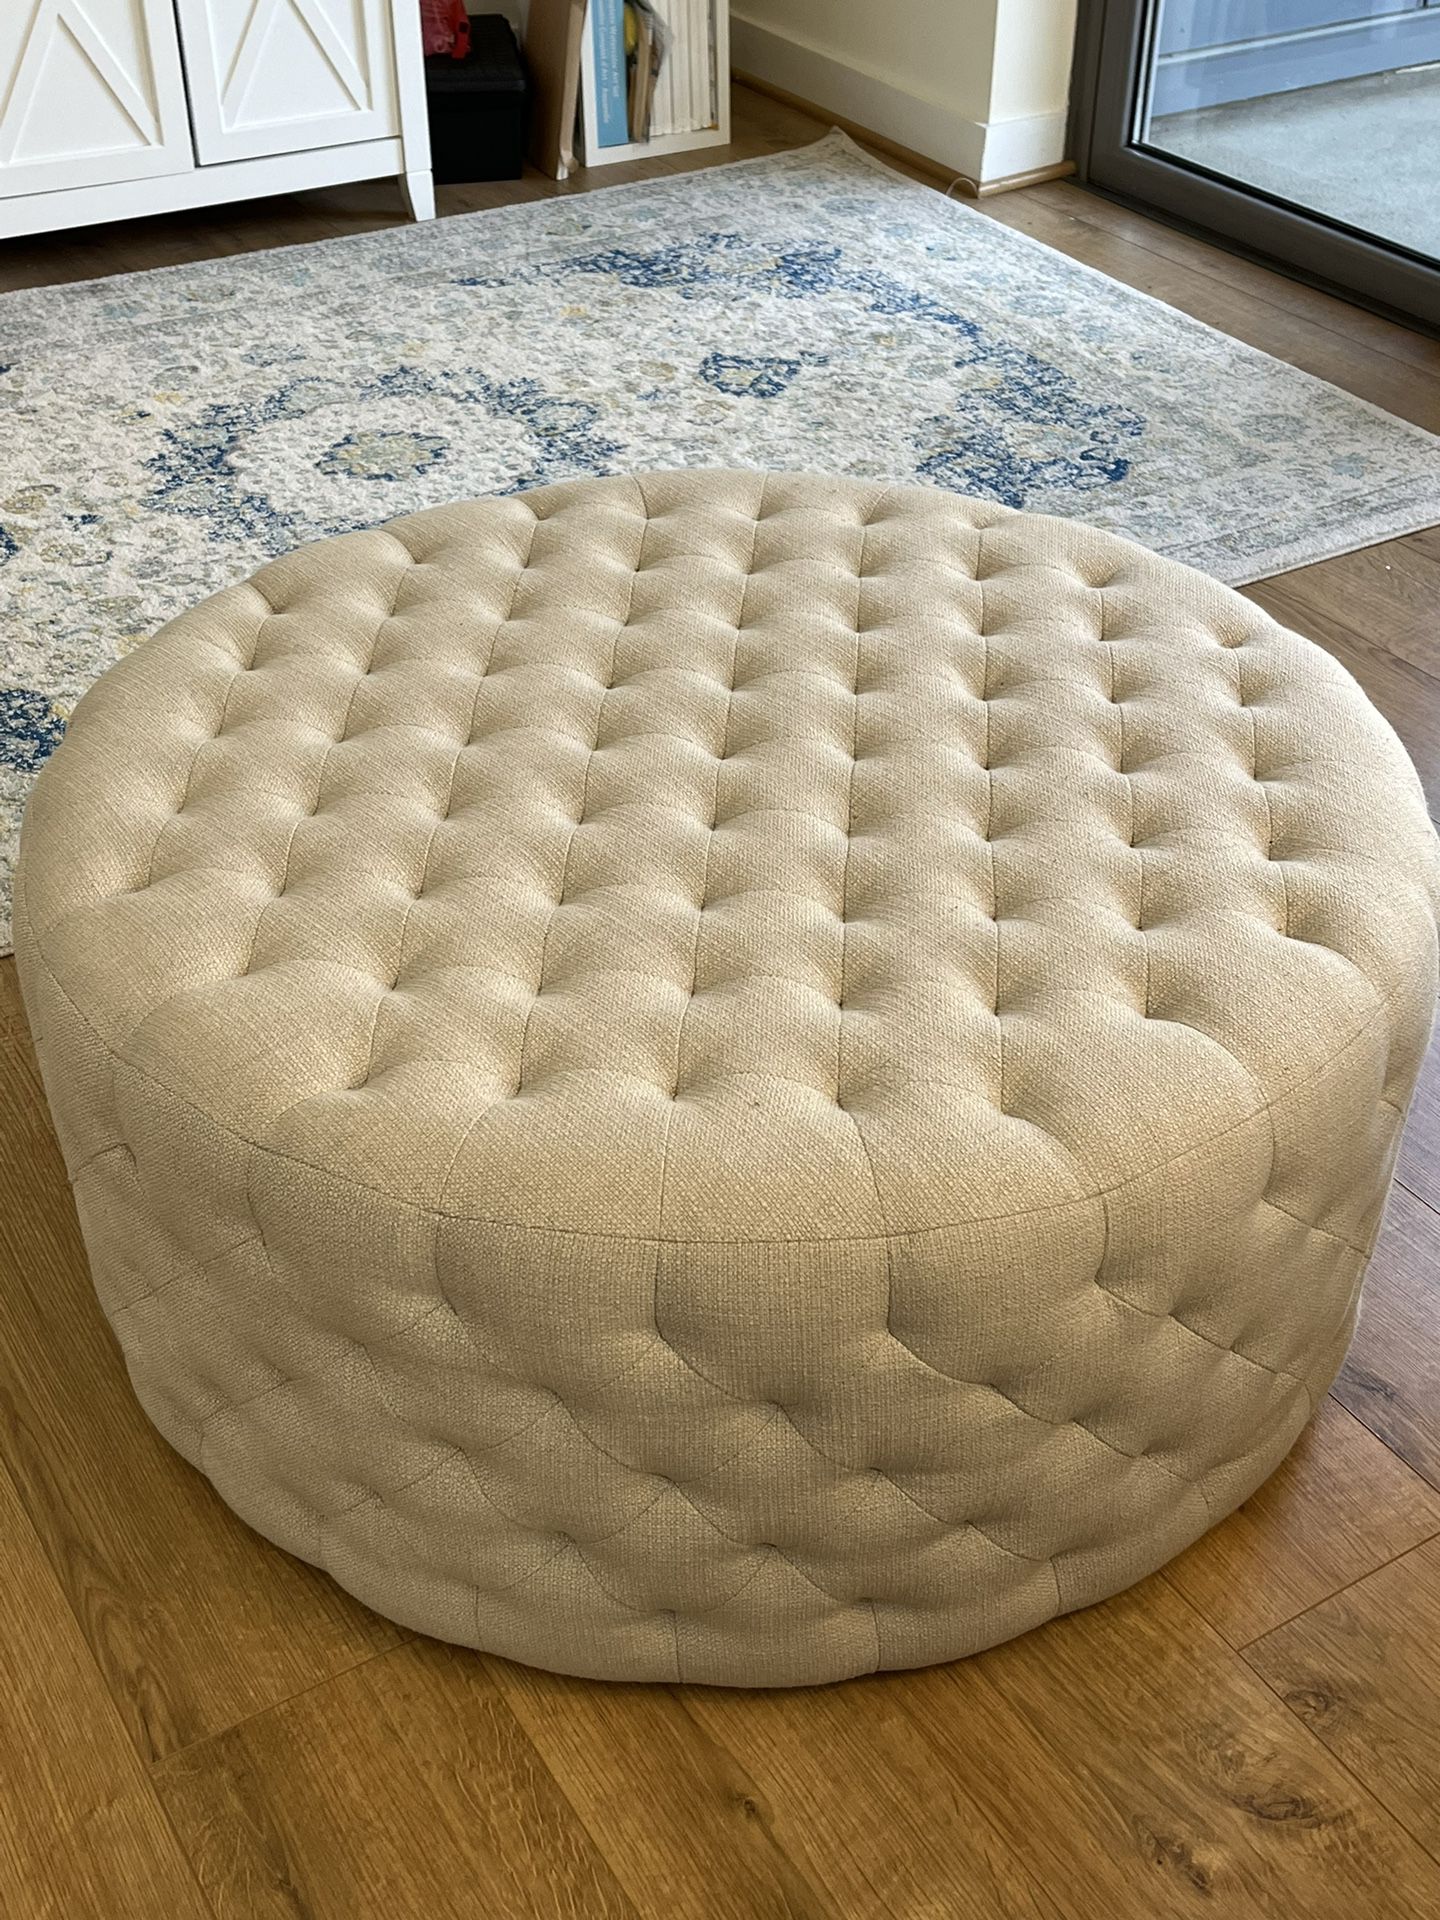 Gorgeous Crate & Barrell Round Tufted Ottoman